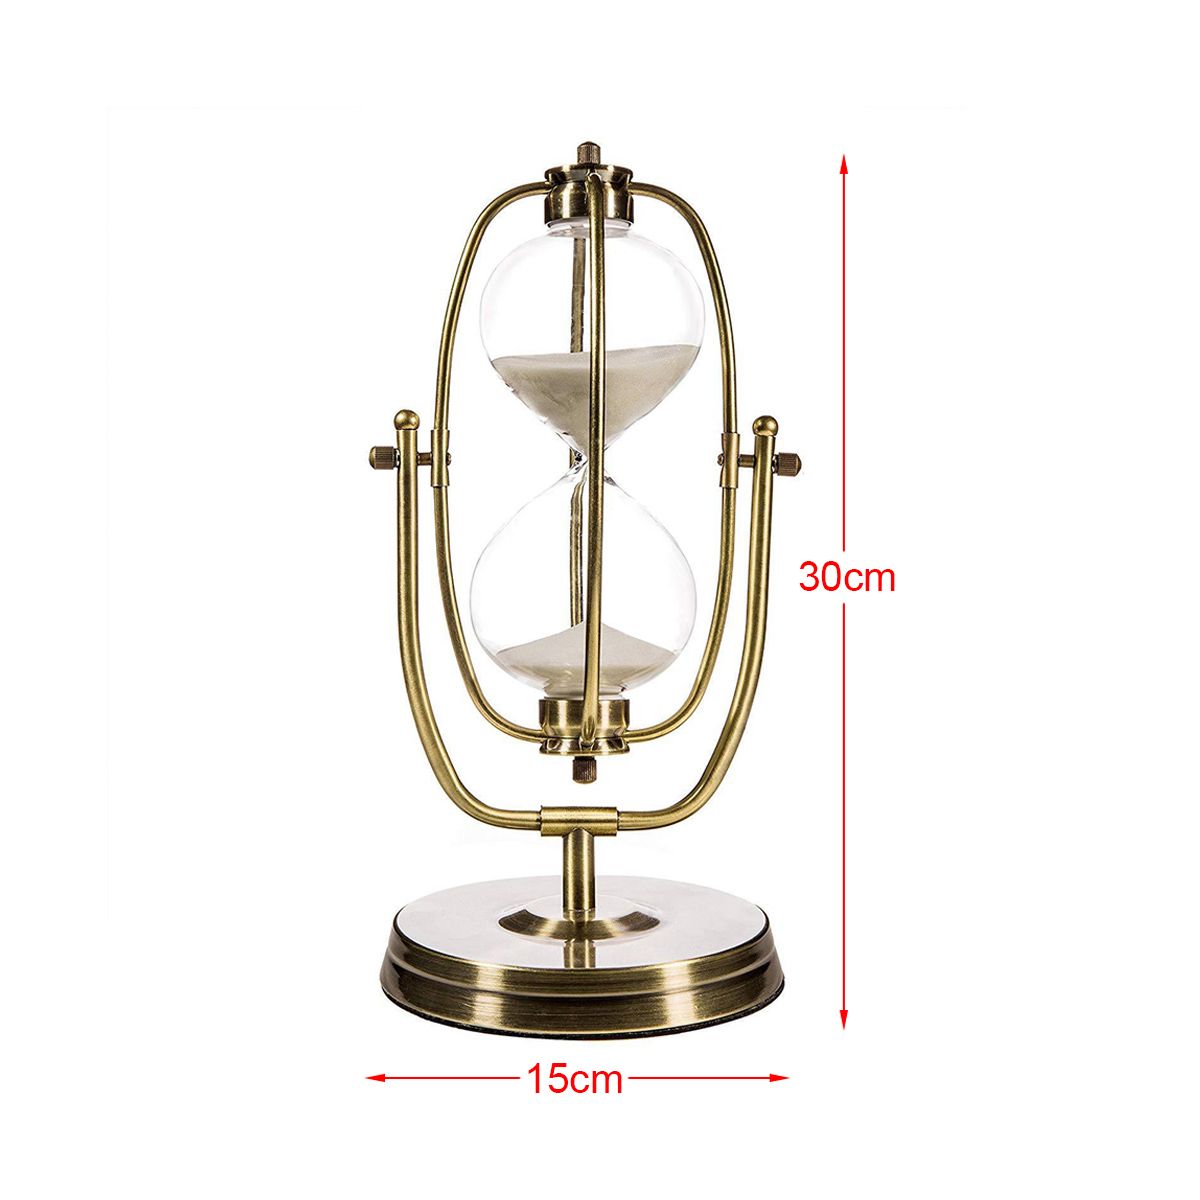 60Min-Hourglass-Timer-Bronze-Rotation-Sand-glass-Countdown-Home-Office-Decorations-1460347